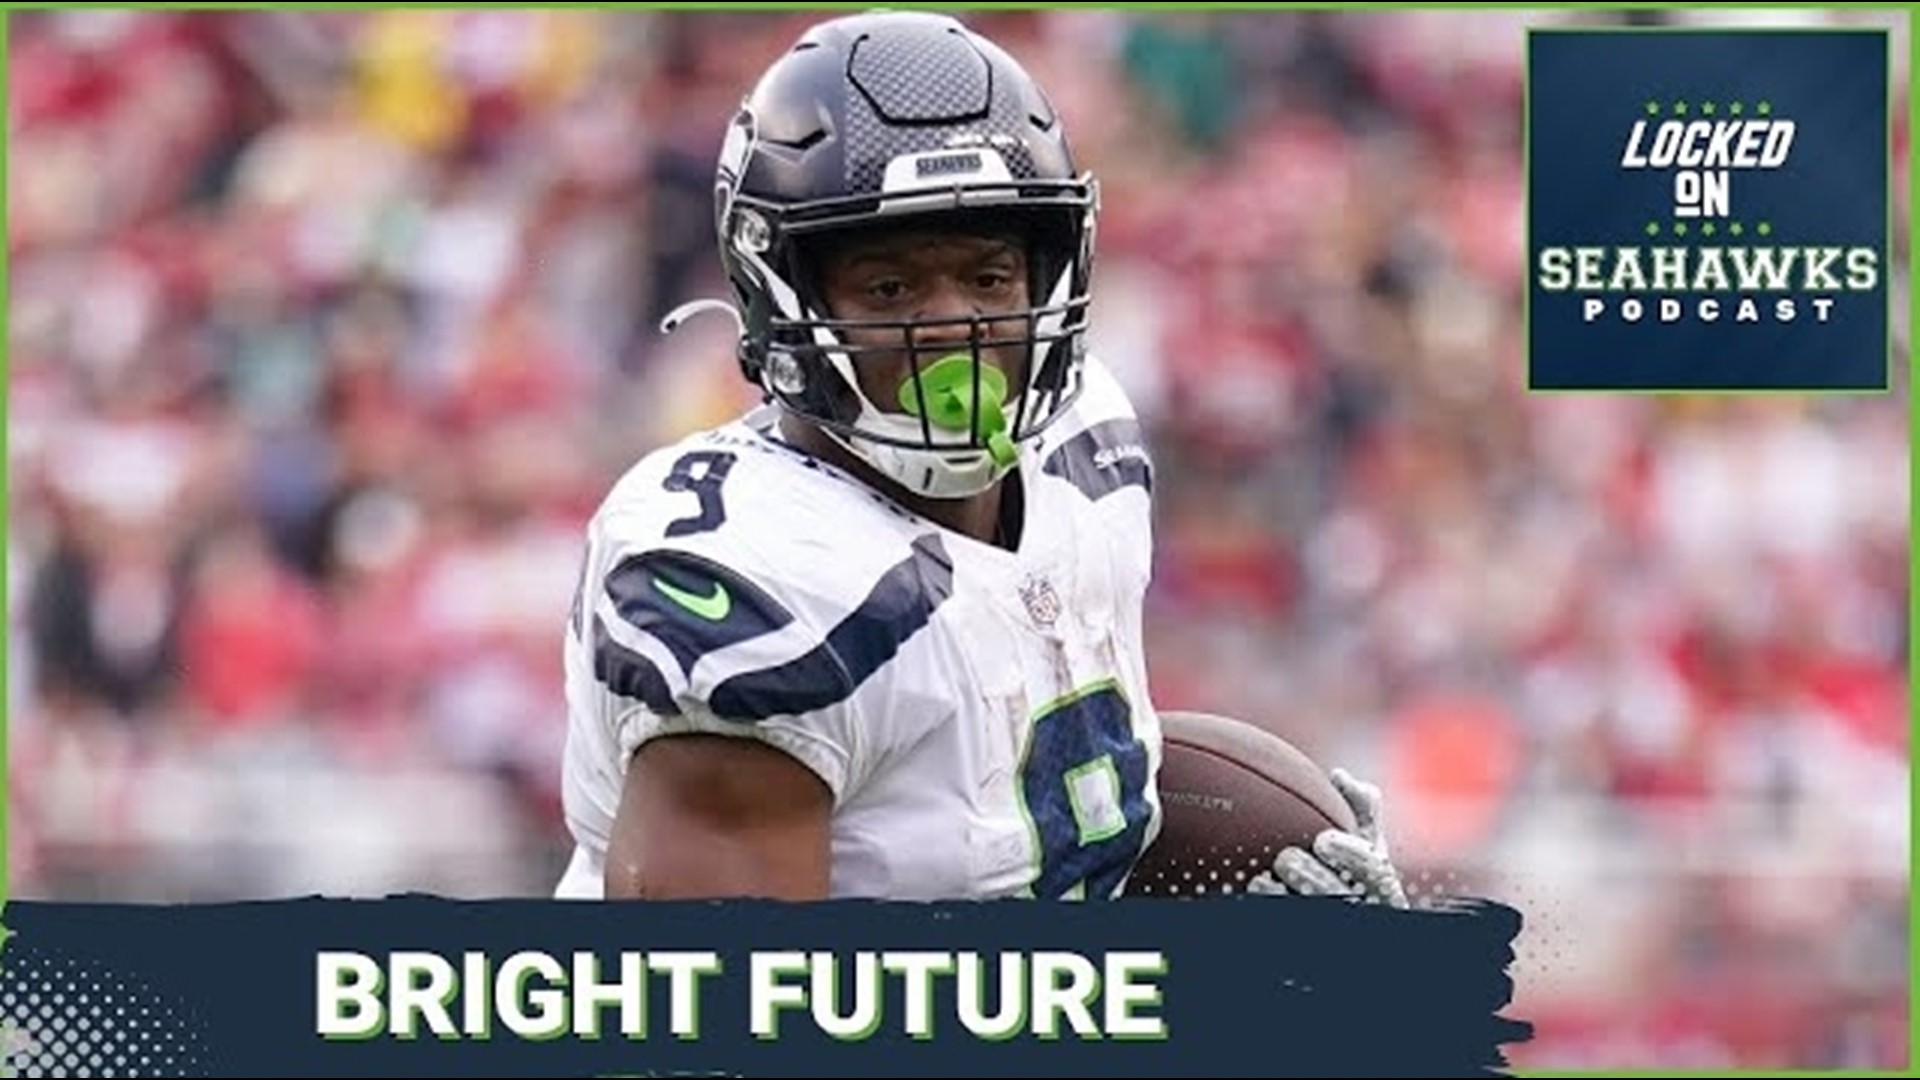 The hosts discuss why such optimism is warranted and how taking the next step forward towards Super Bowl contender may be the toughest one for the franchise to make.